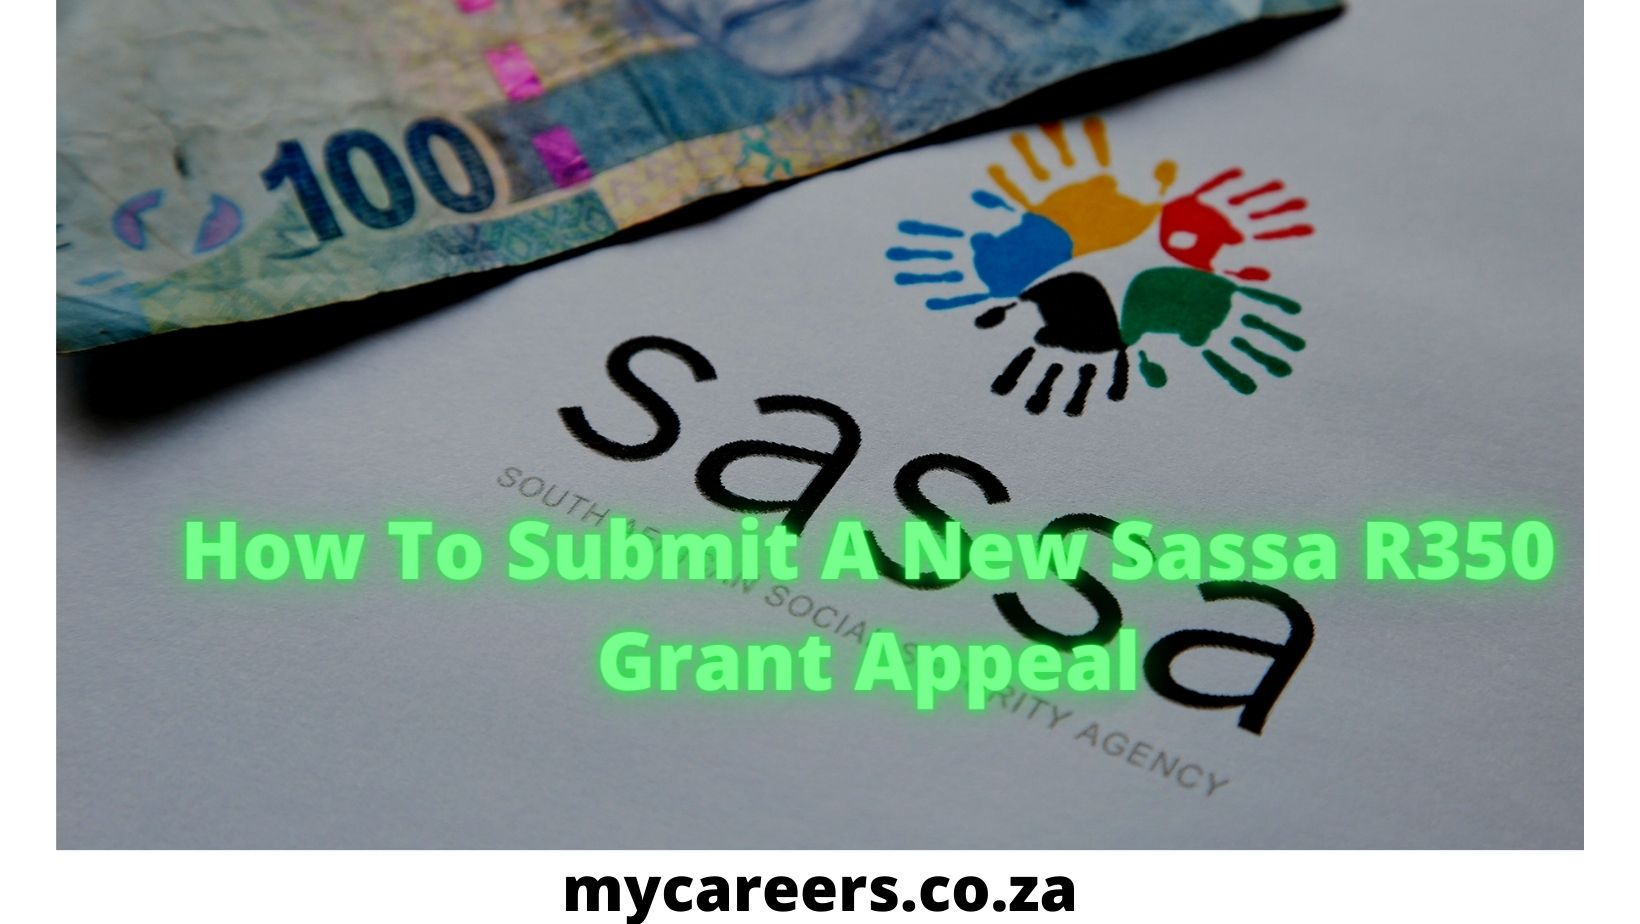 How To Submit A New Sassa R350 Grant Appeal